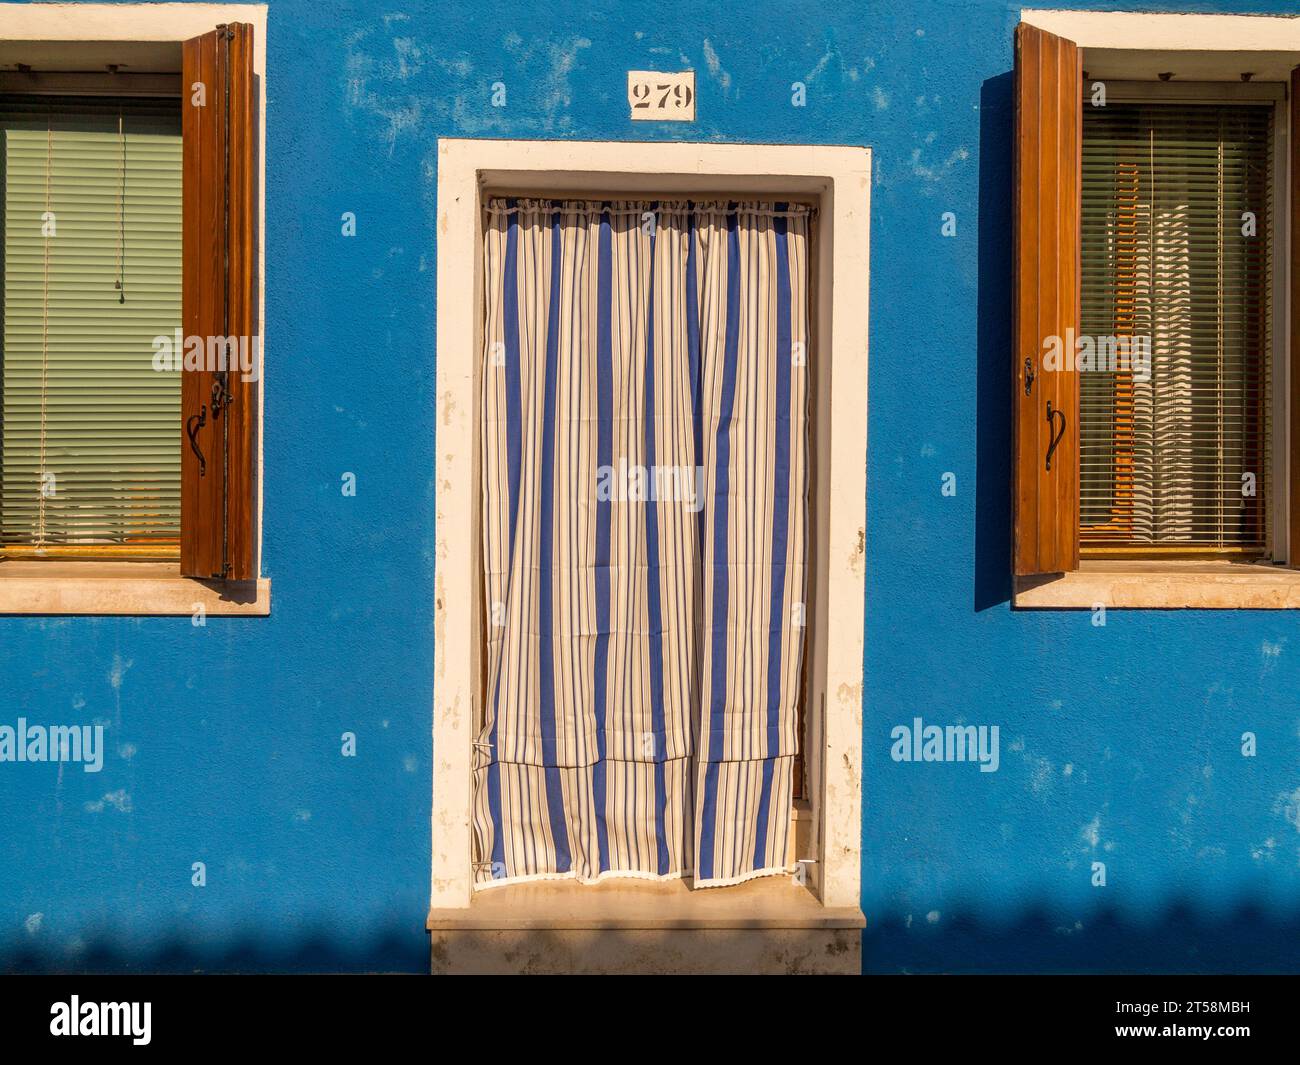 A house in Burano in Venice, Italy. A blue and white striped sheet hides the entrance. Two windows with wooden shutters and green blinds complete the Stock Photo